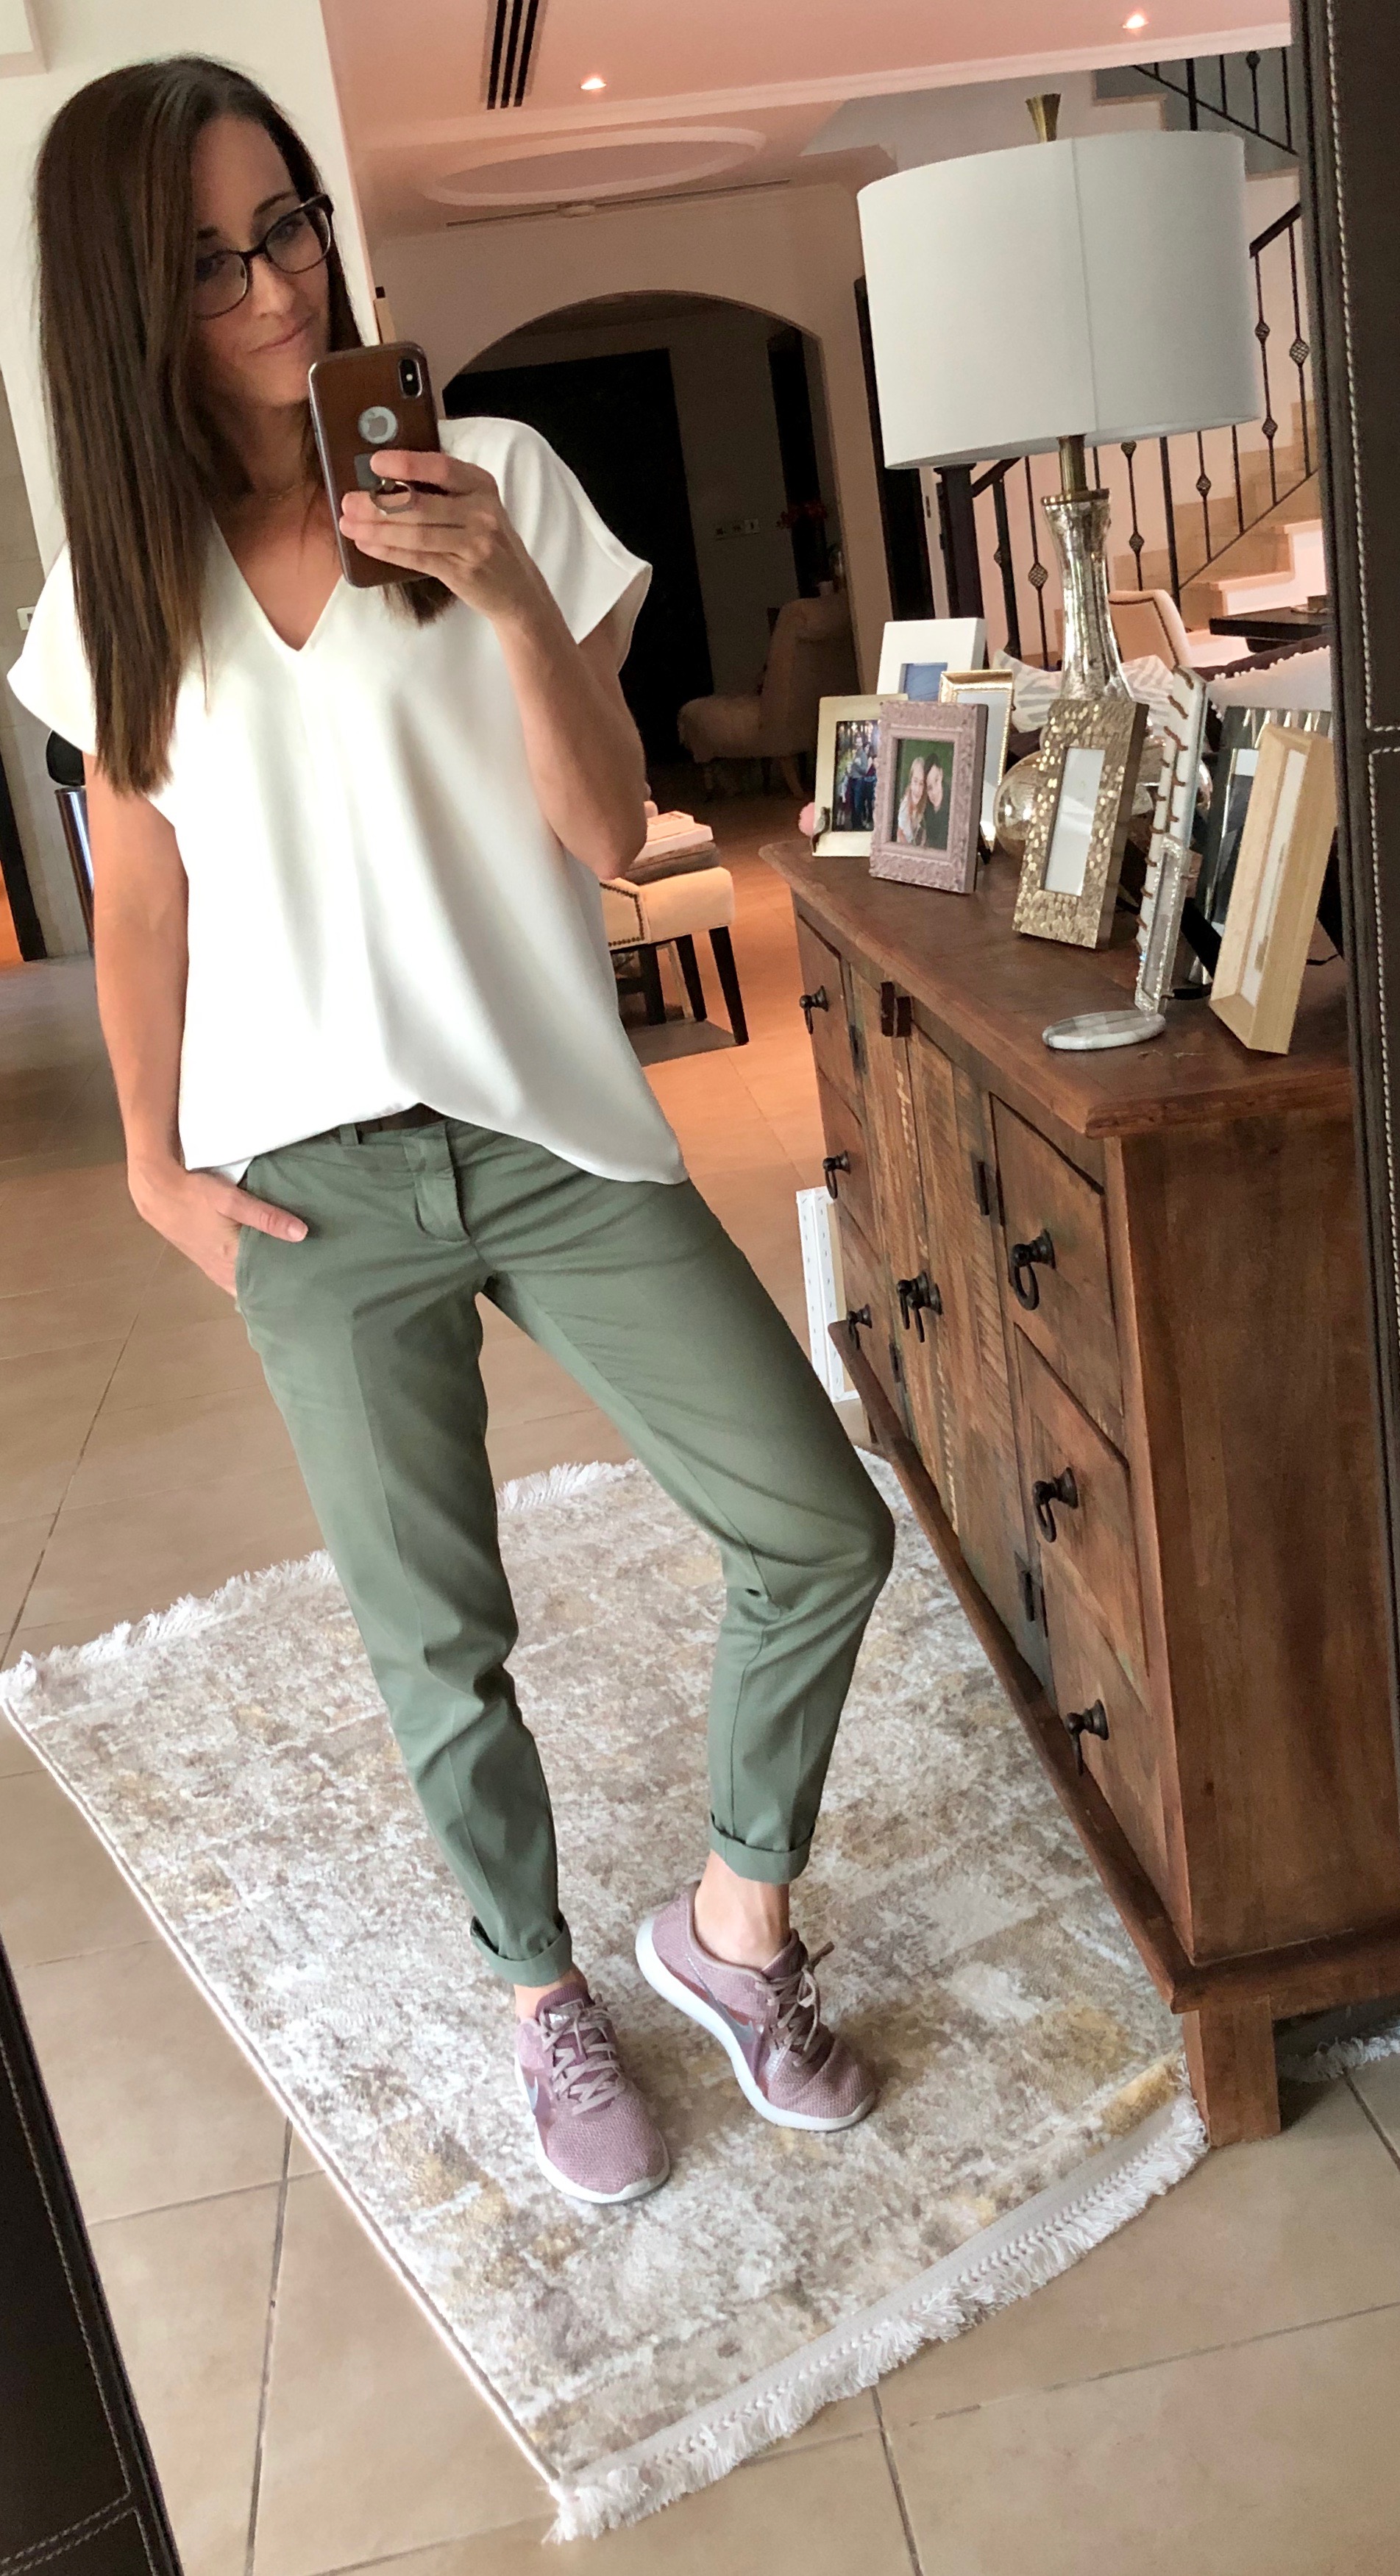 neutrals, white top, khaki pants, dressed up, dressed down, casual, everyday style, method39, style advisor, my style, wear it, as seen on me, how to get dressed, versatile wardrobe, look your best